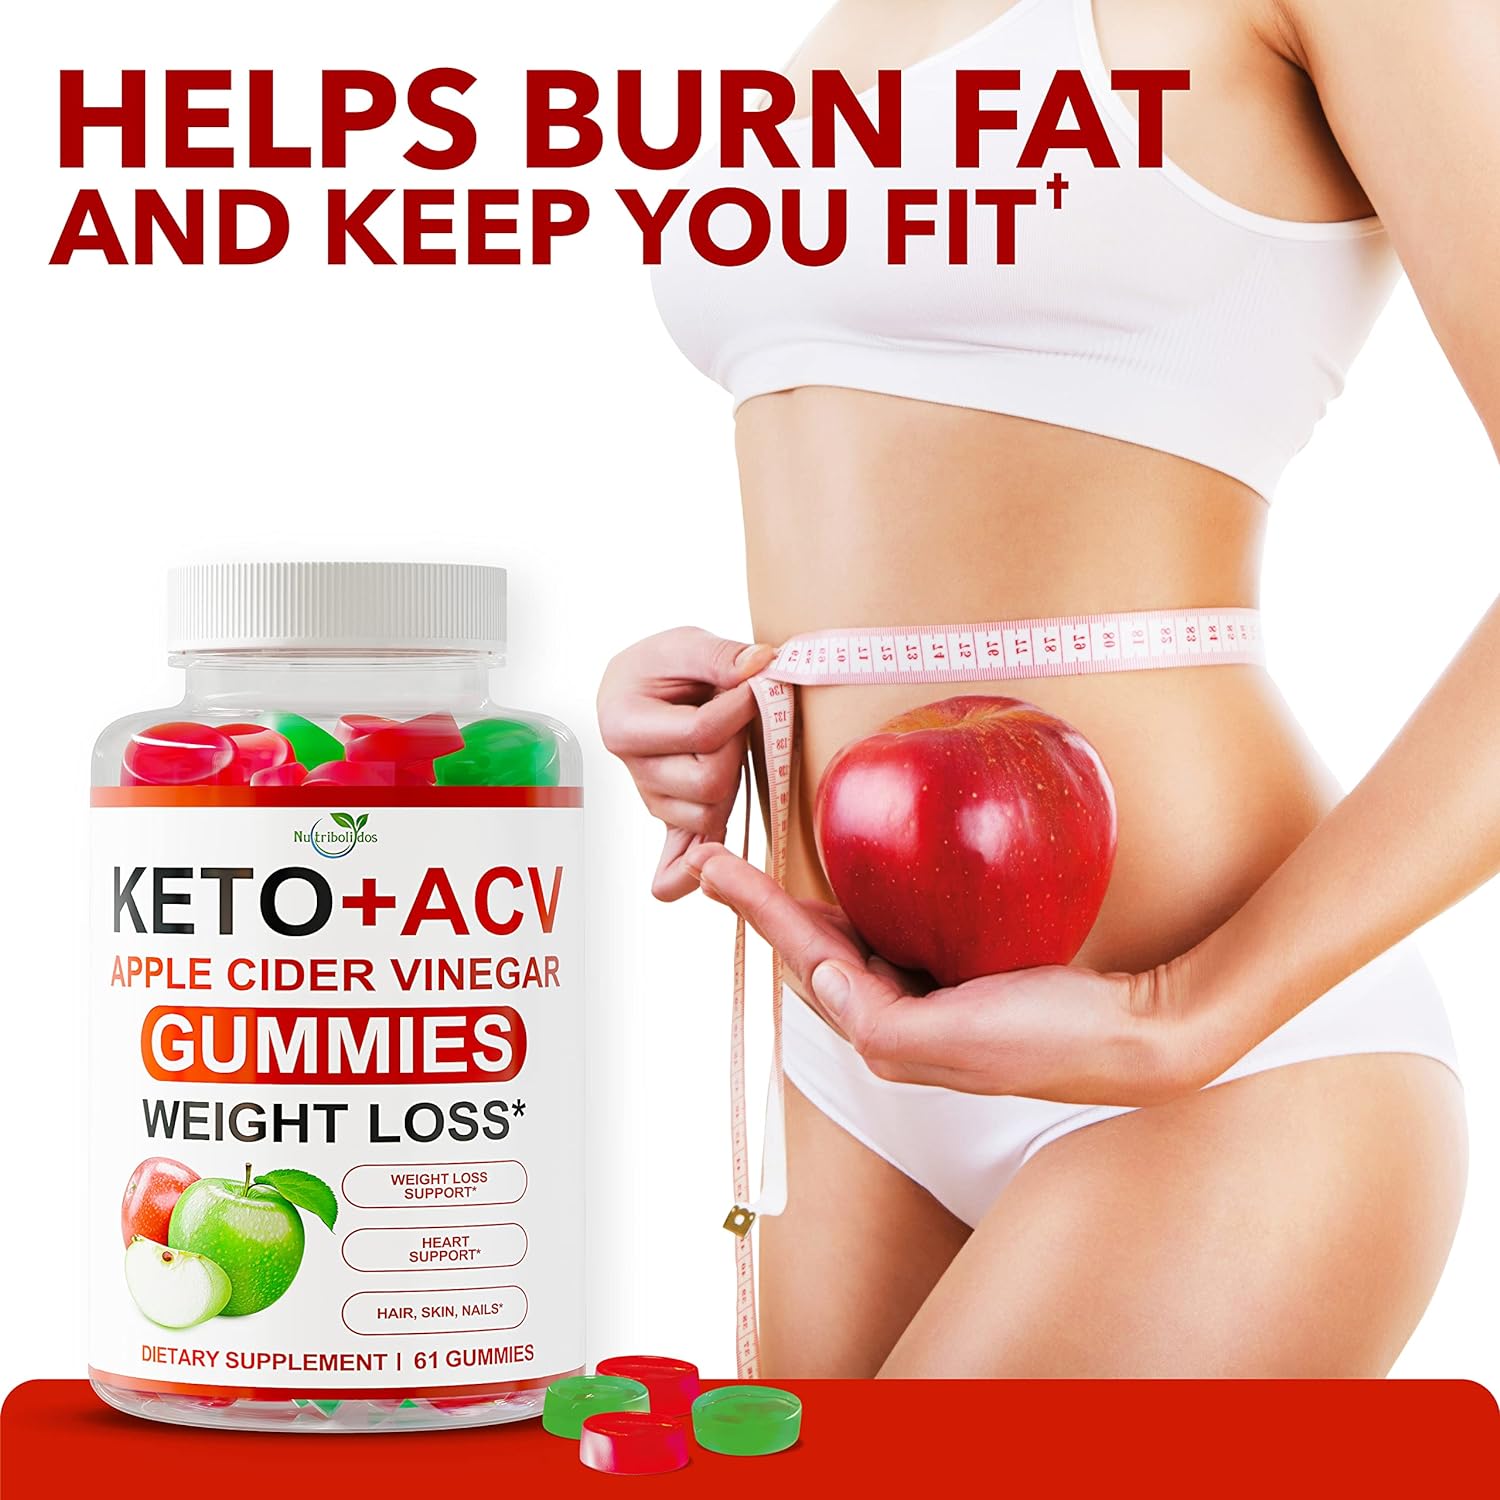 Keto ACV Gummies Advanced Weight Loss - ACV Keto Gummies for Weight Loss - Keto Gummy Supplement for Women and Men - Apple Cider Vinegar for Cleanse - Detox - Digestion - Made in USA